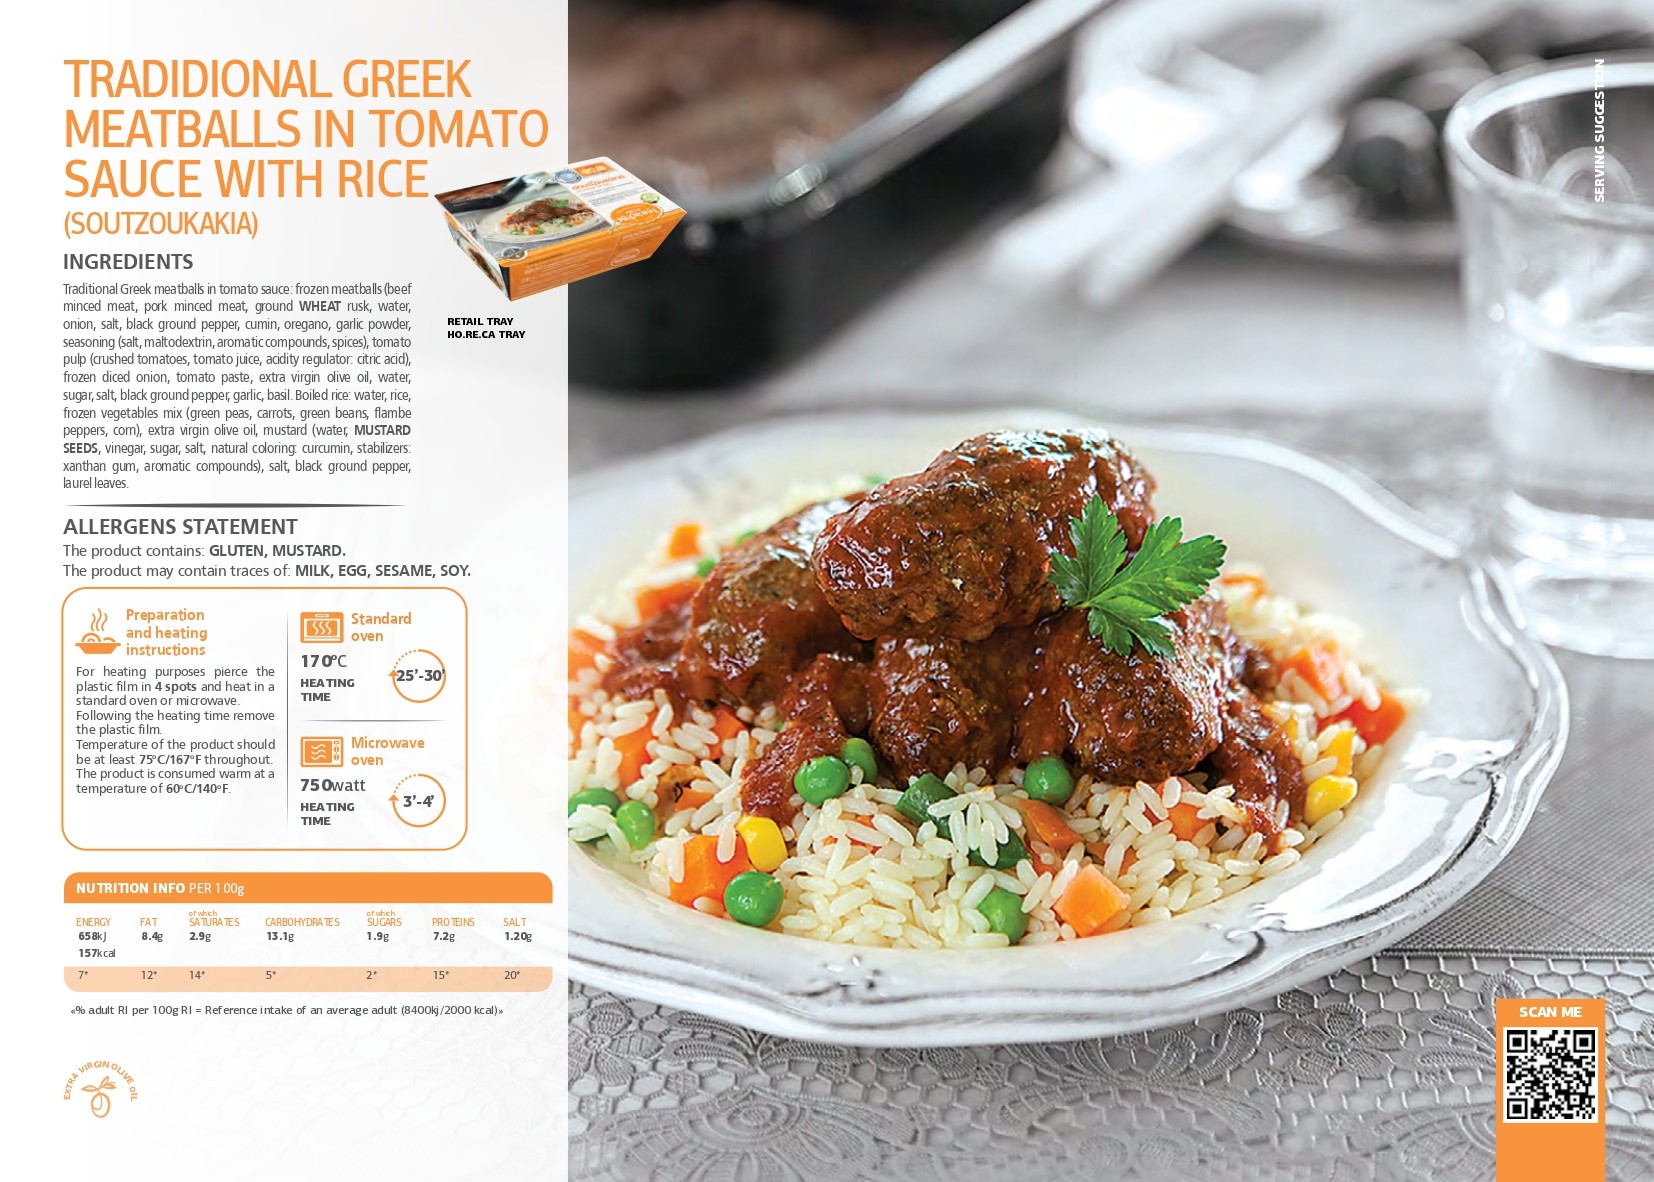 SK - Traditional Greek meatballs in tomato sauce with rice (Soutzoukakia) pdf image